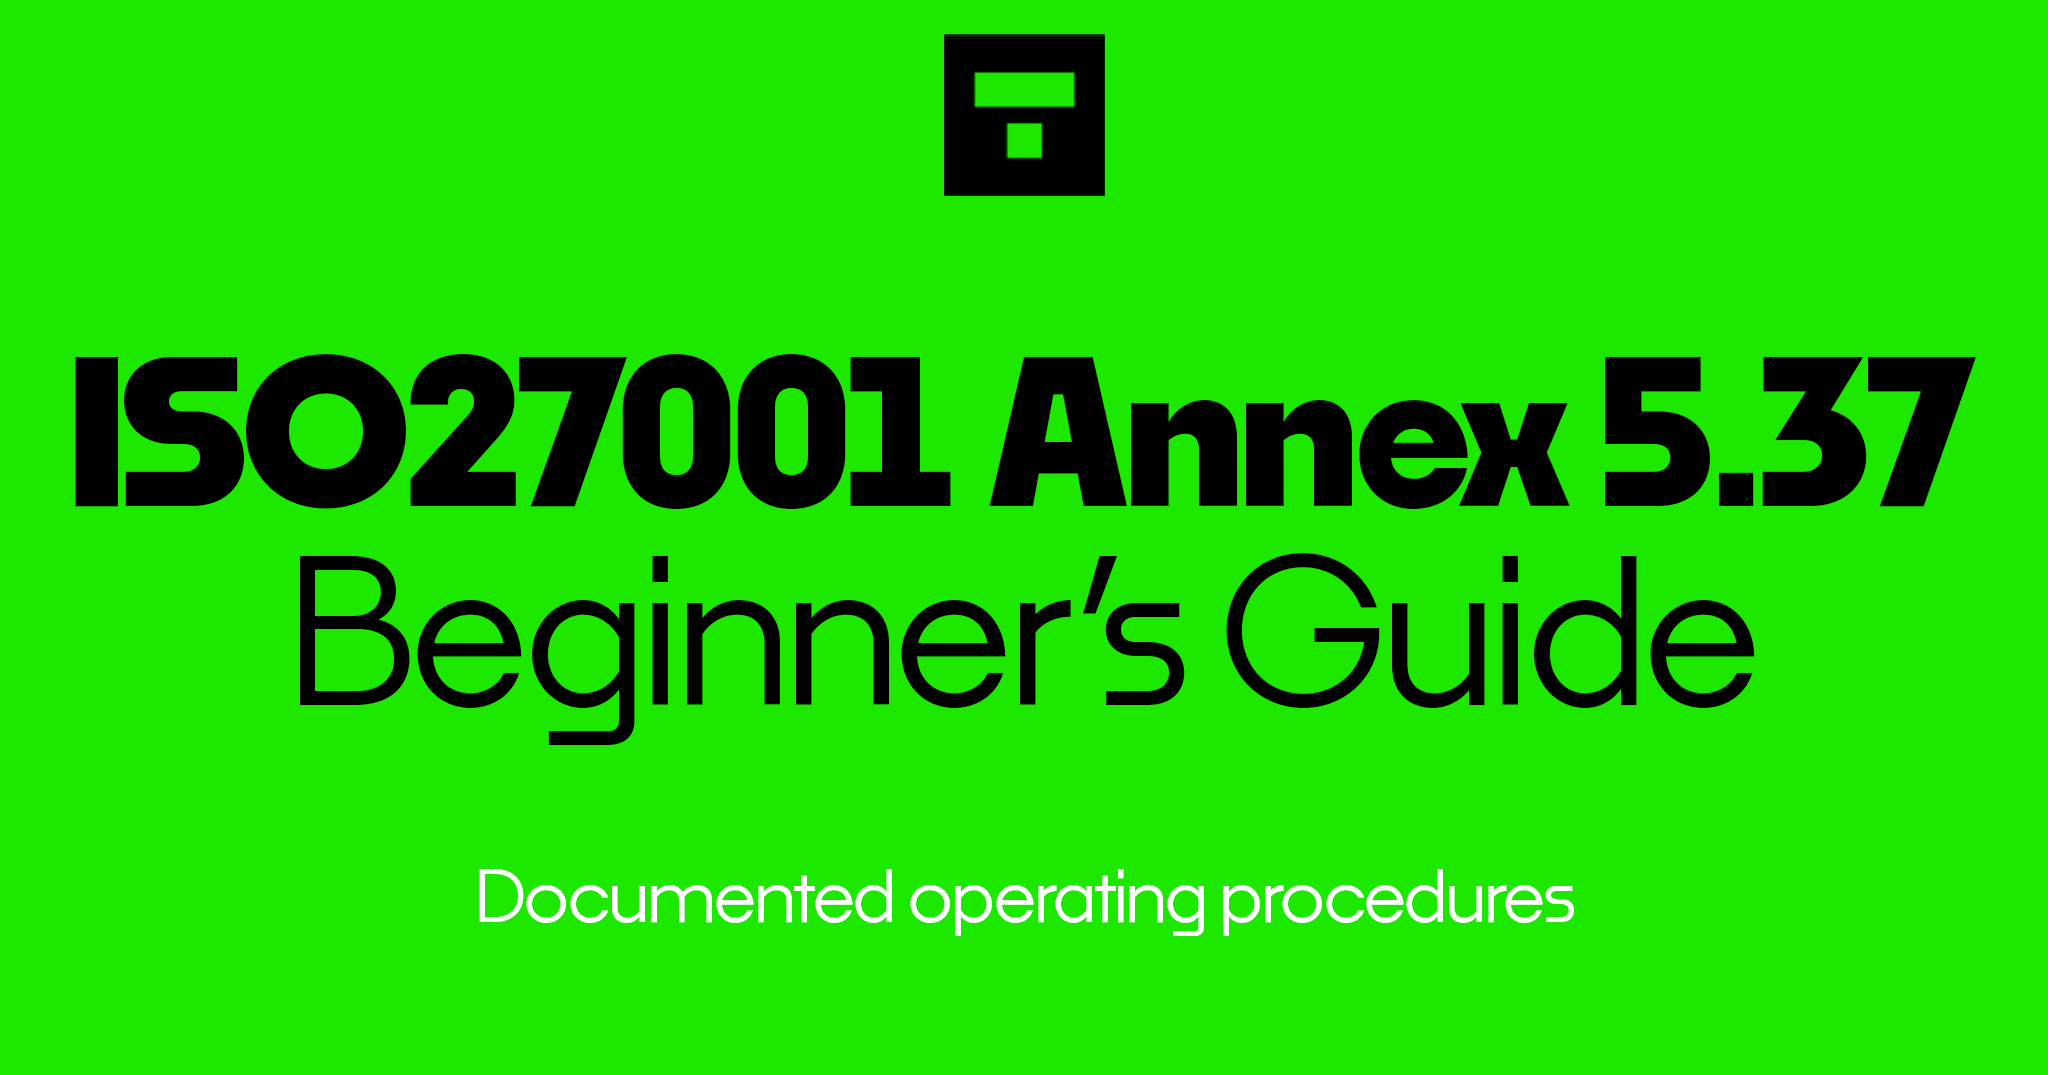 How to Implement ISO 27001 Annex A 5.37 Documented Operating Procedures